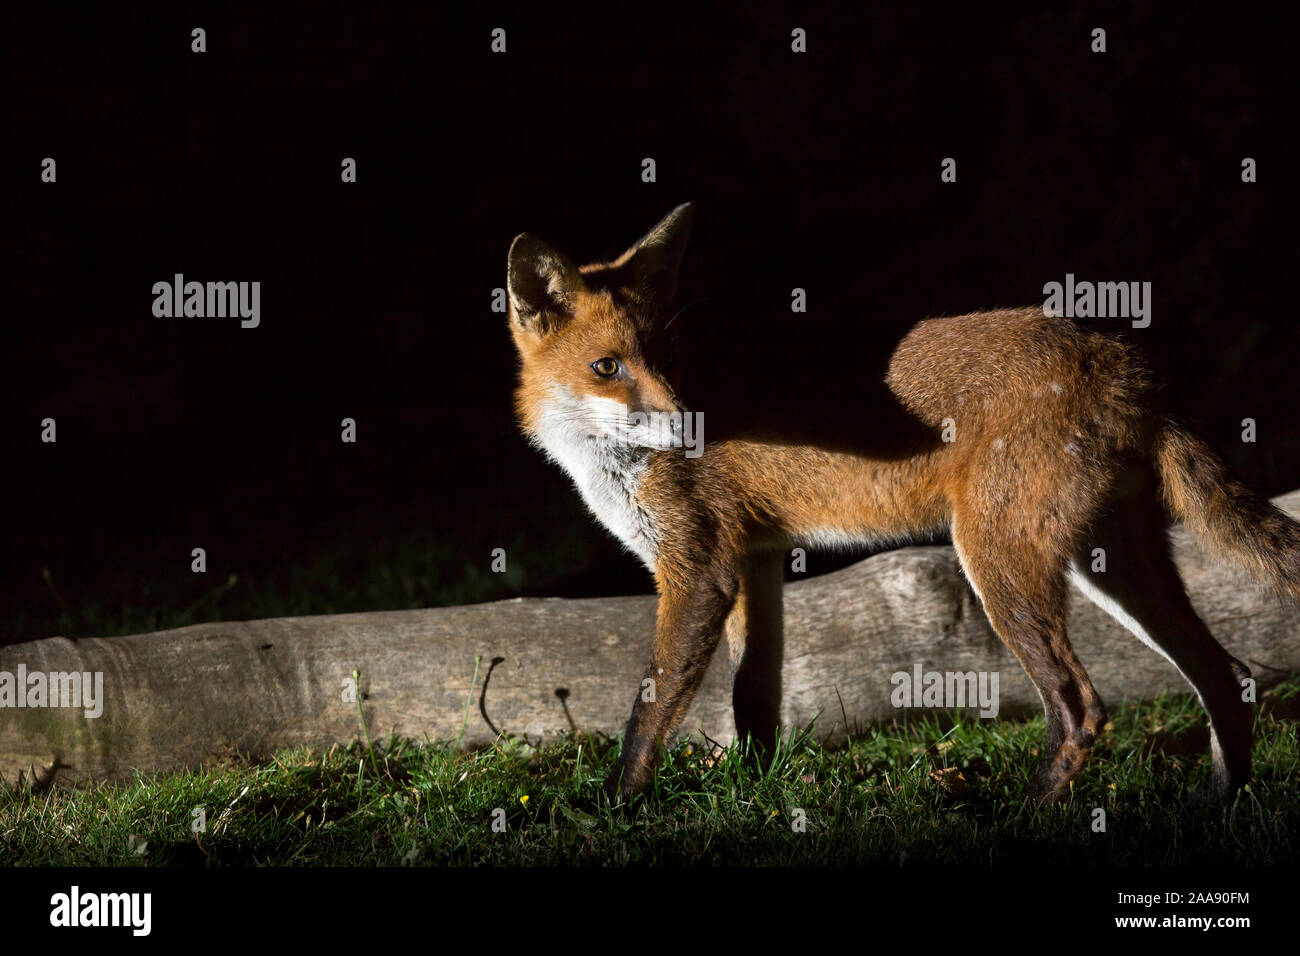 Close up of wild, hungry, urban red fox (Vulpes vulpes) captured in security spotlight isolated in the dark, foraging for food in a UK garden at night. Stock Photo